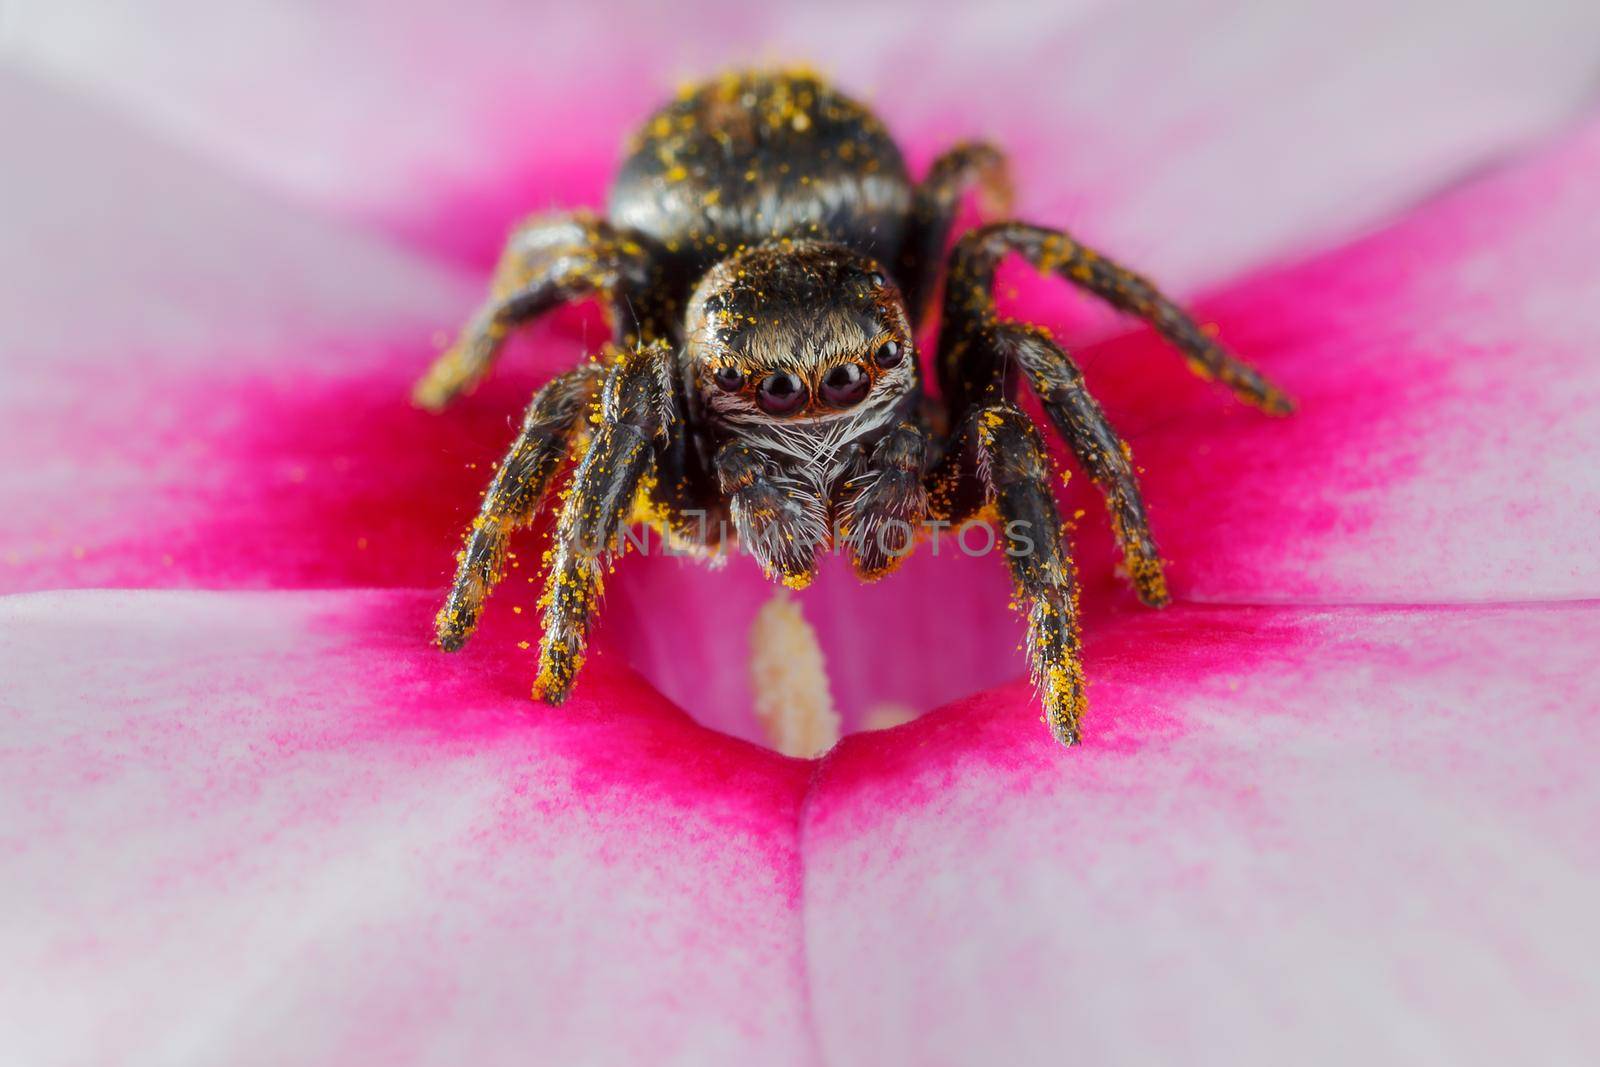 Jumping spider on the nice pink and white flower by Lincikas